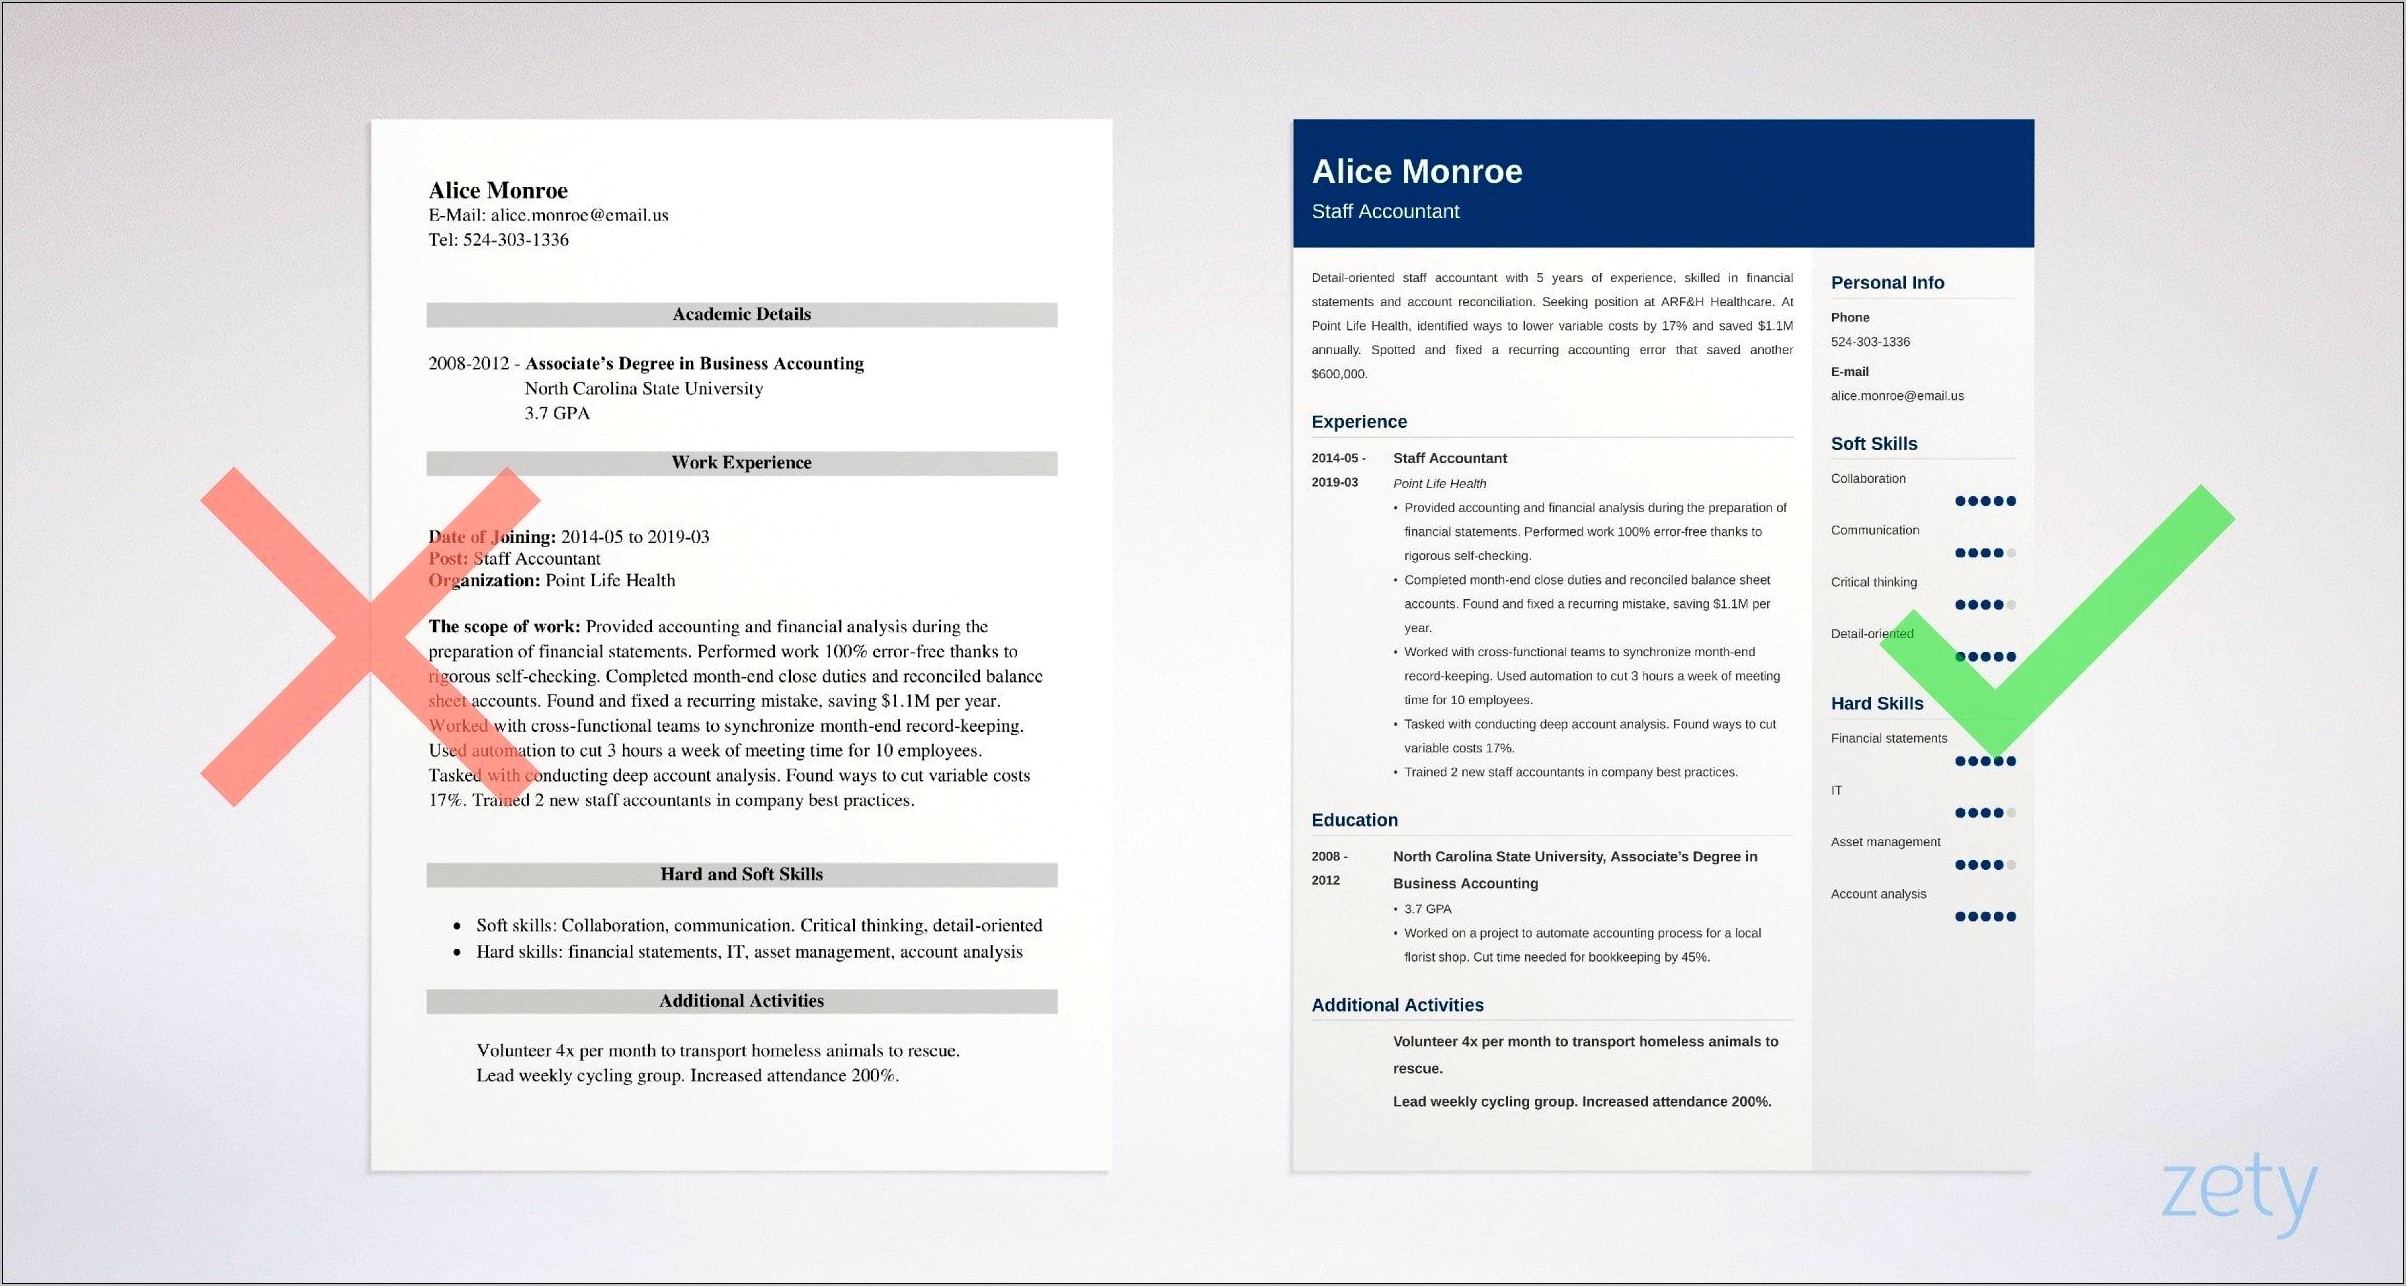 Professional Summary Resume Sample For Accountant